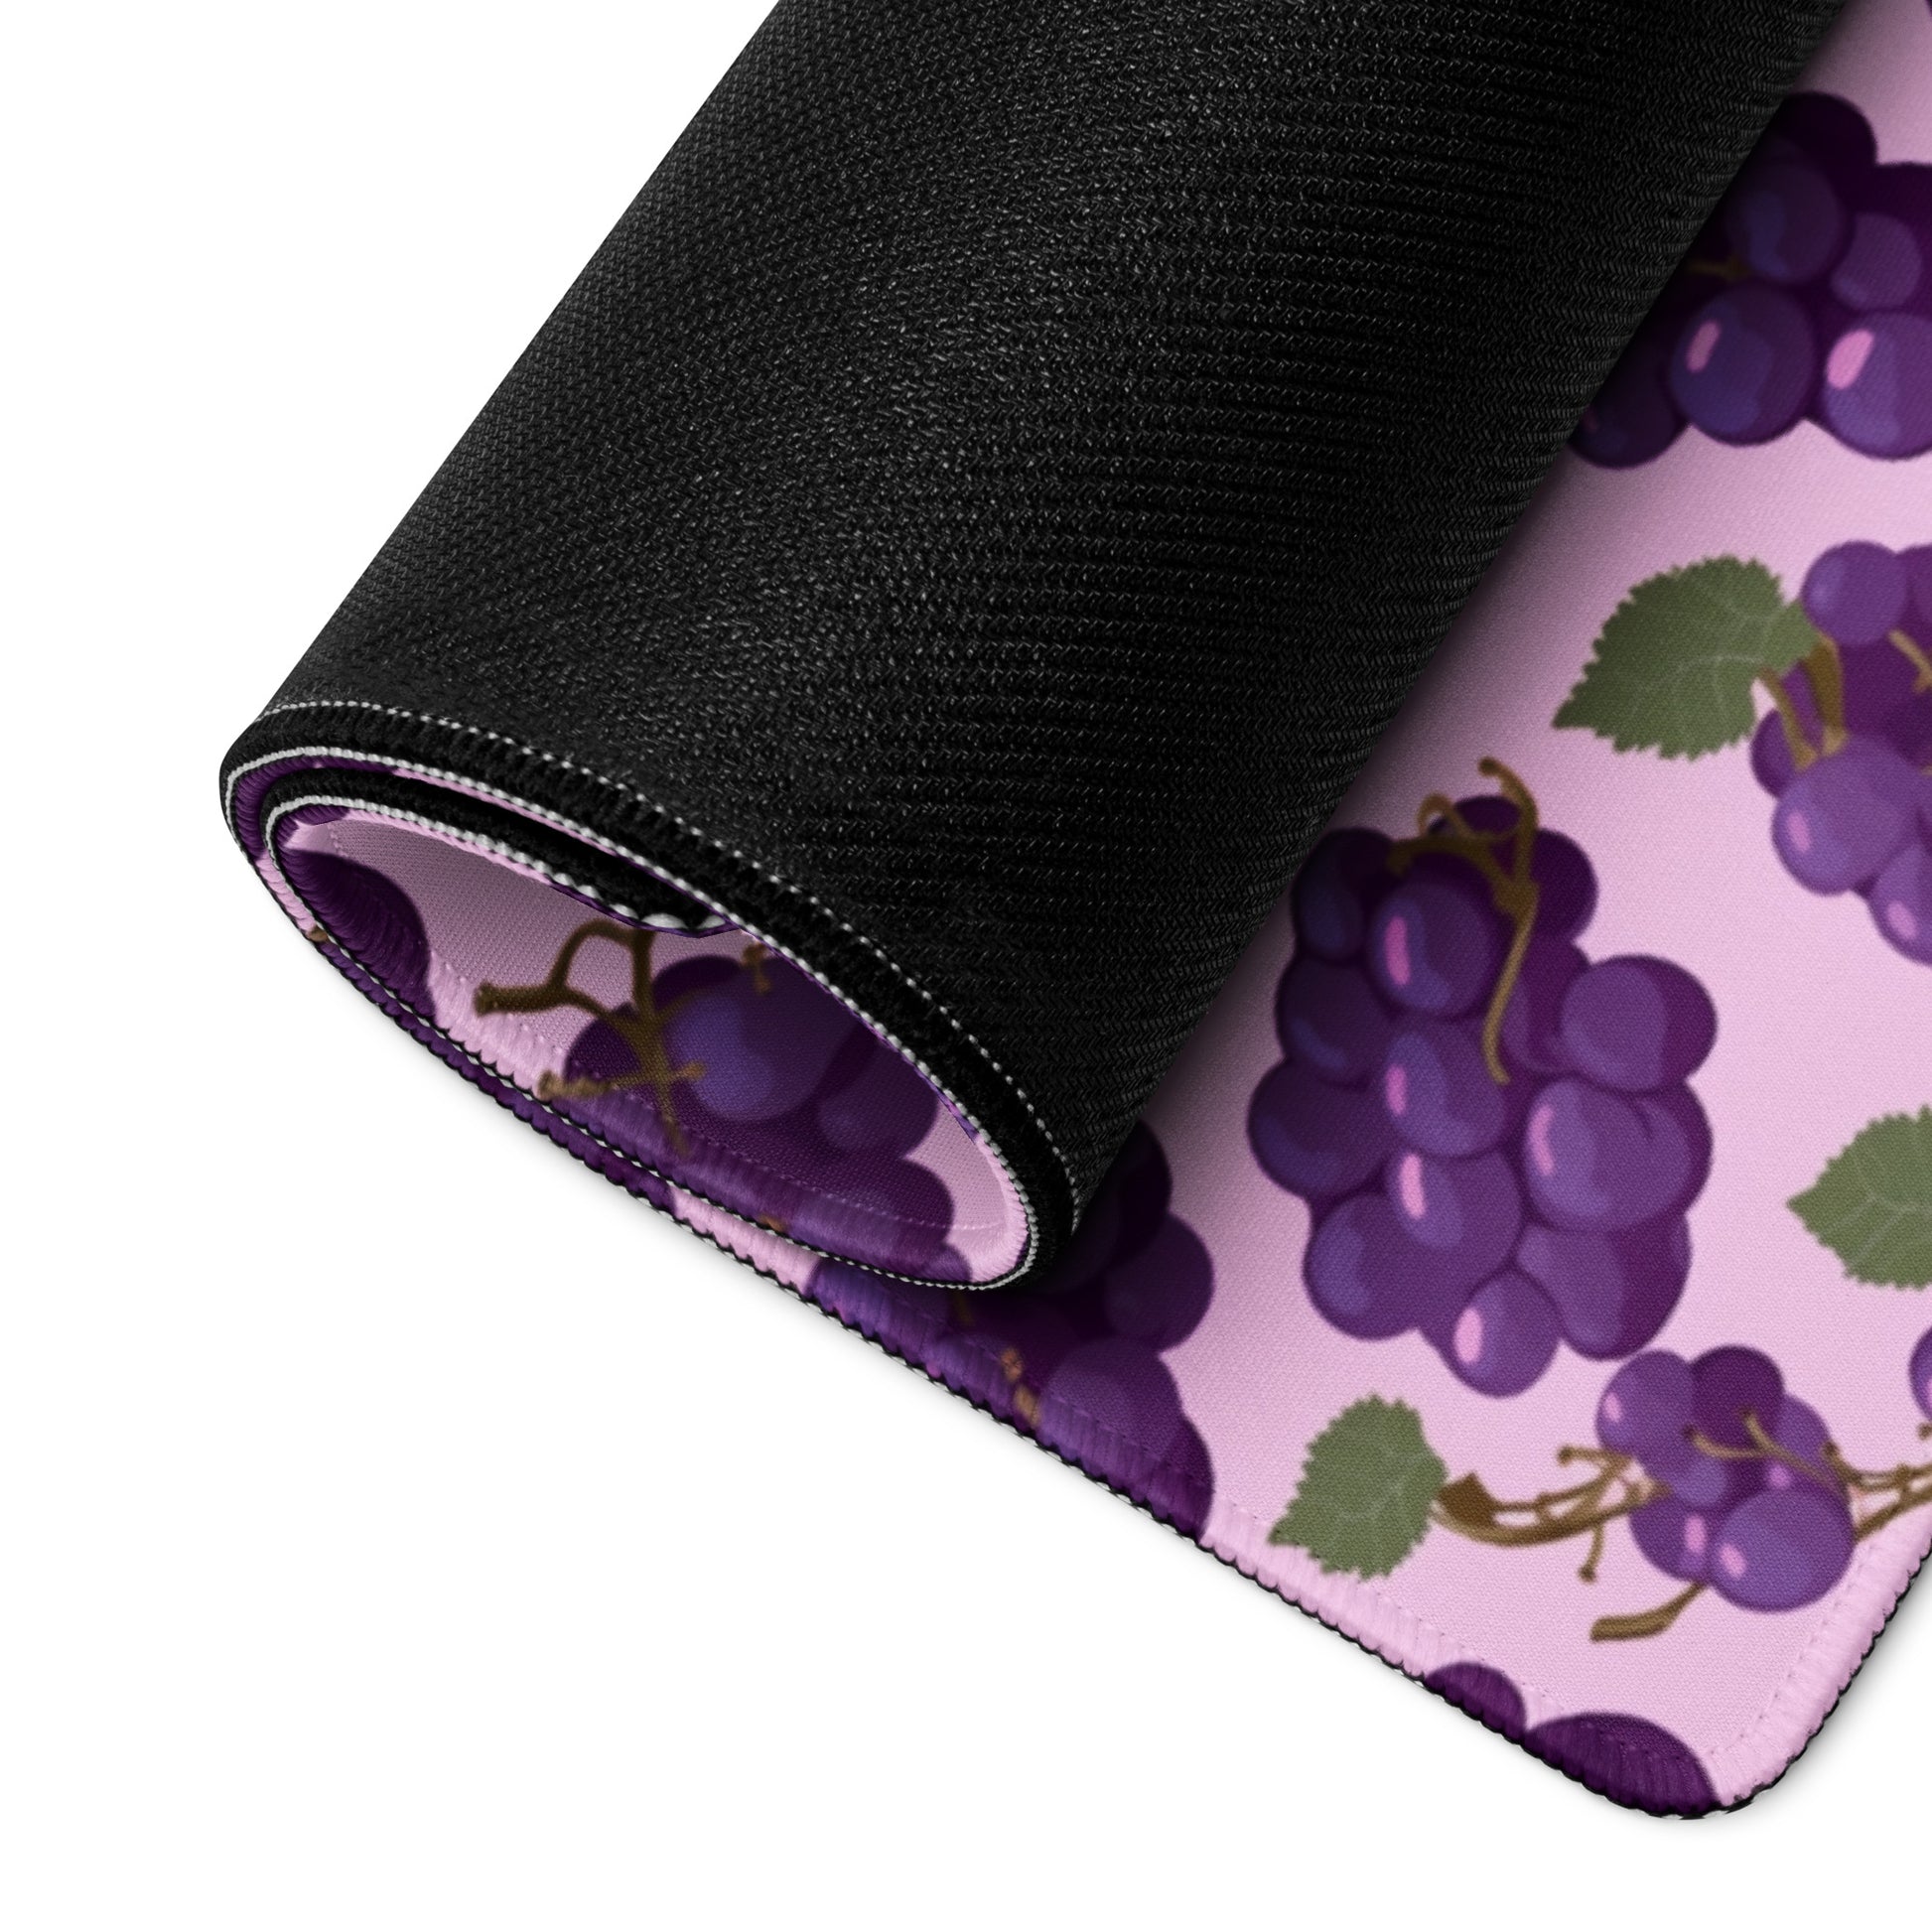 A 36" x 18" desk pad with bushels of grapes all over it rolled up. Purple in color.